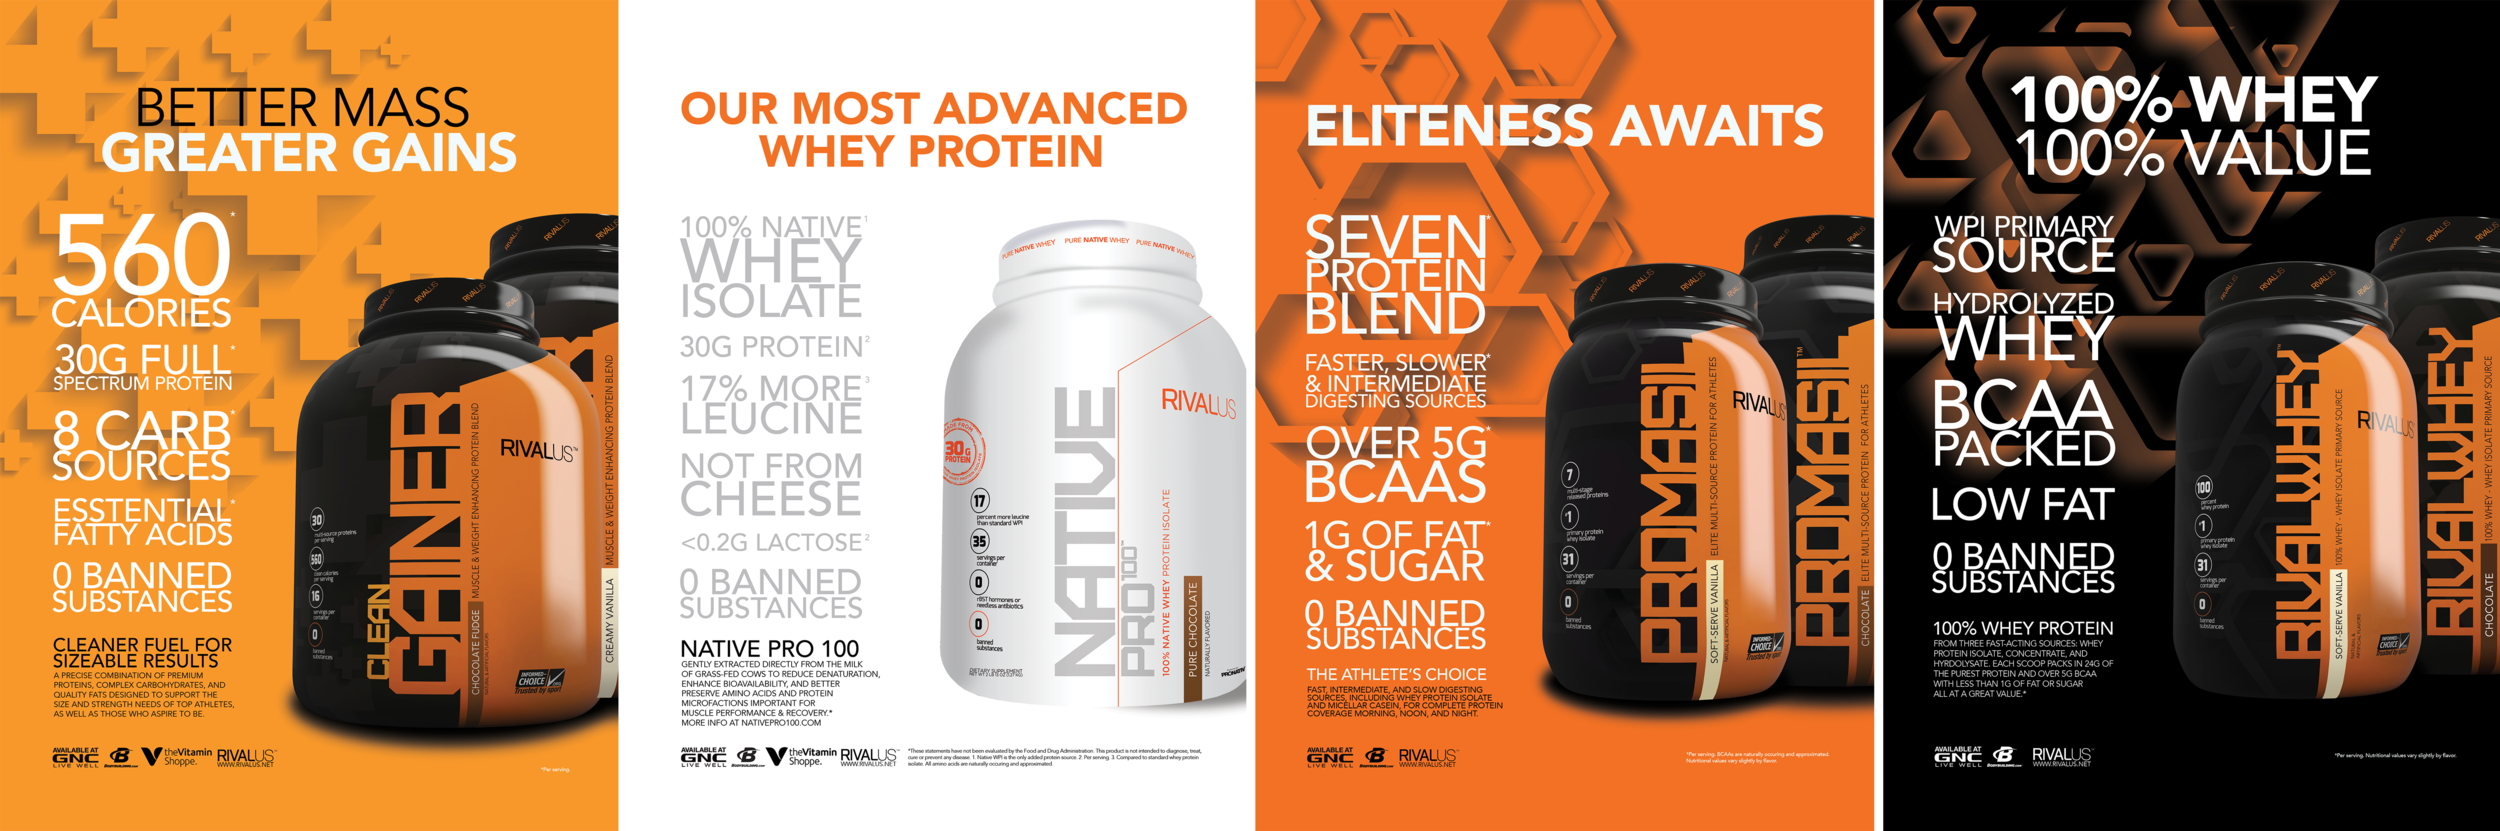   FOUR PROTEIN PAGES IN MUSCLE &amp; FITNESS MAGAZINE    © RIVALUS 2016  